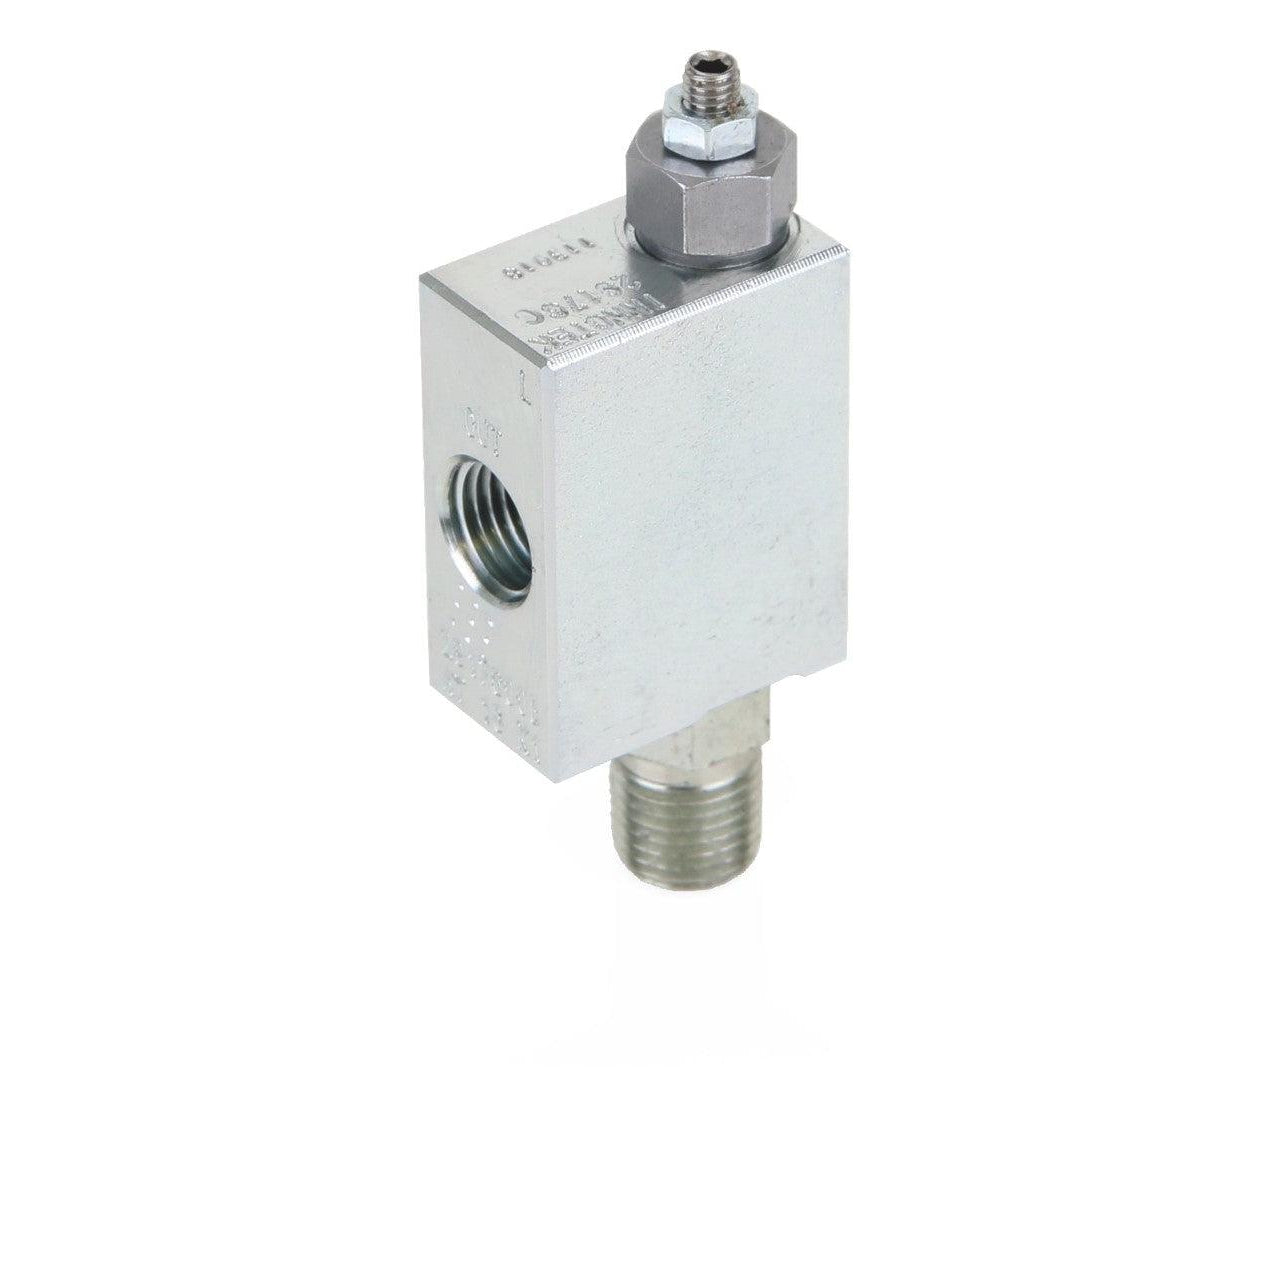 Pressure Relief Valve for G1 and G3 Pumps